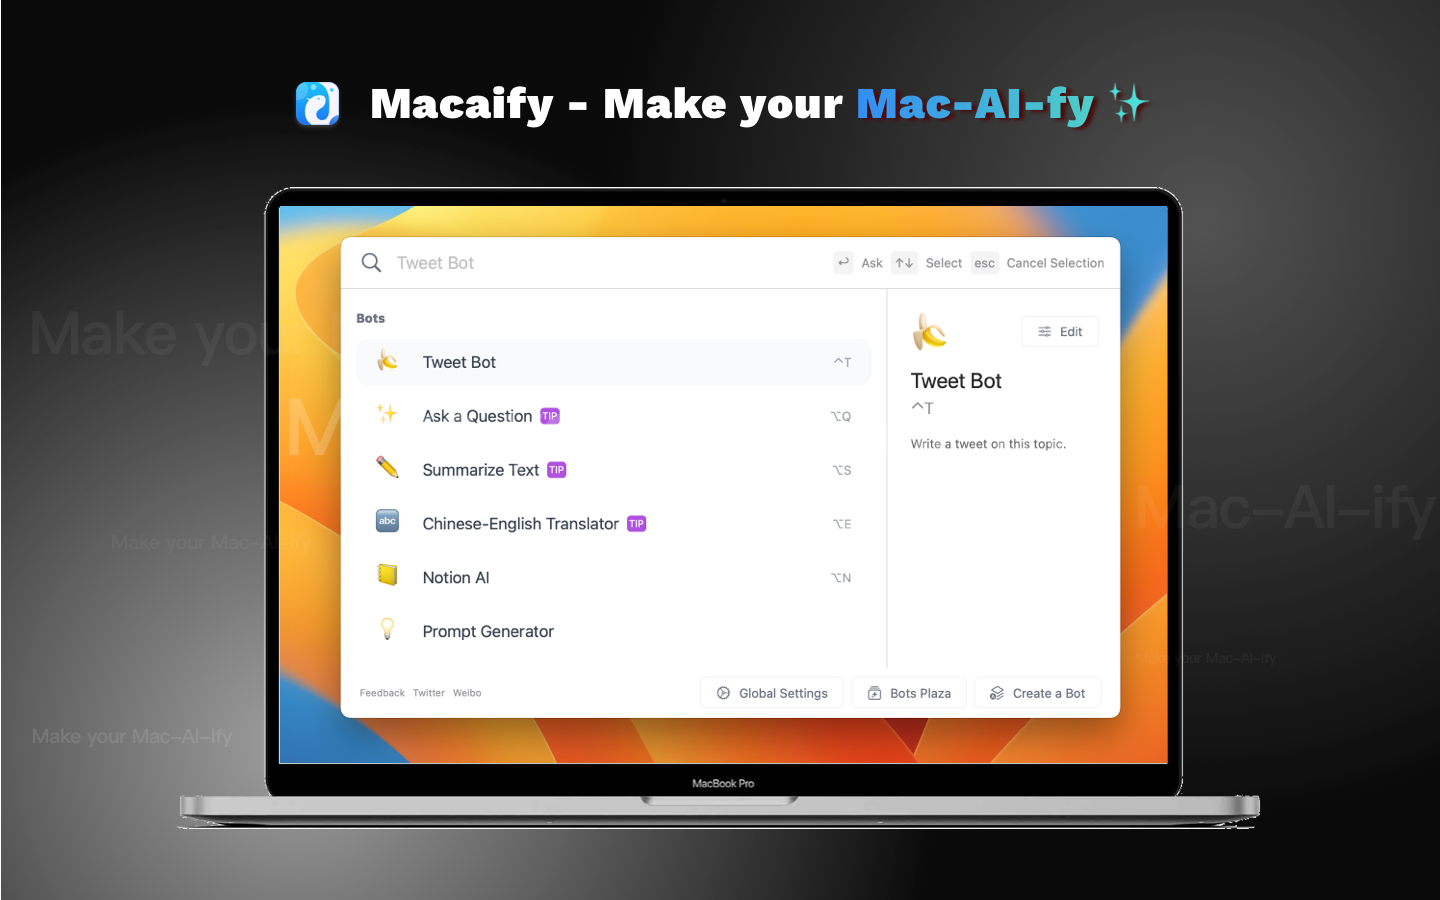 macaify-make-your-mac-ai-fy - Access ChatGPT quickly using keyboard shortcuts in any app